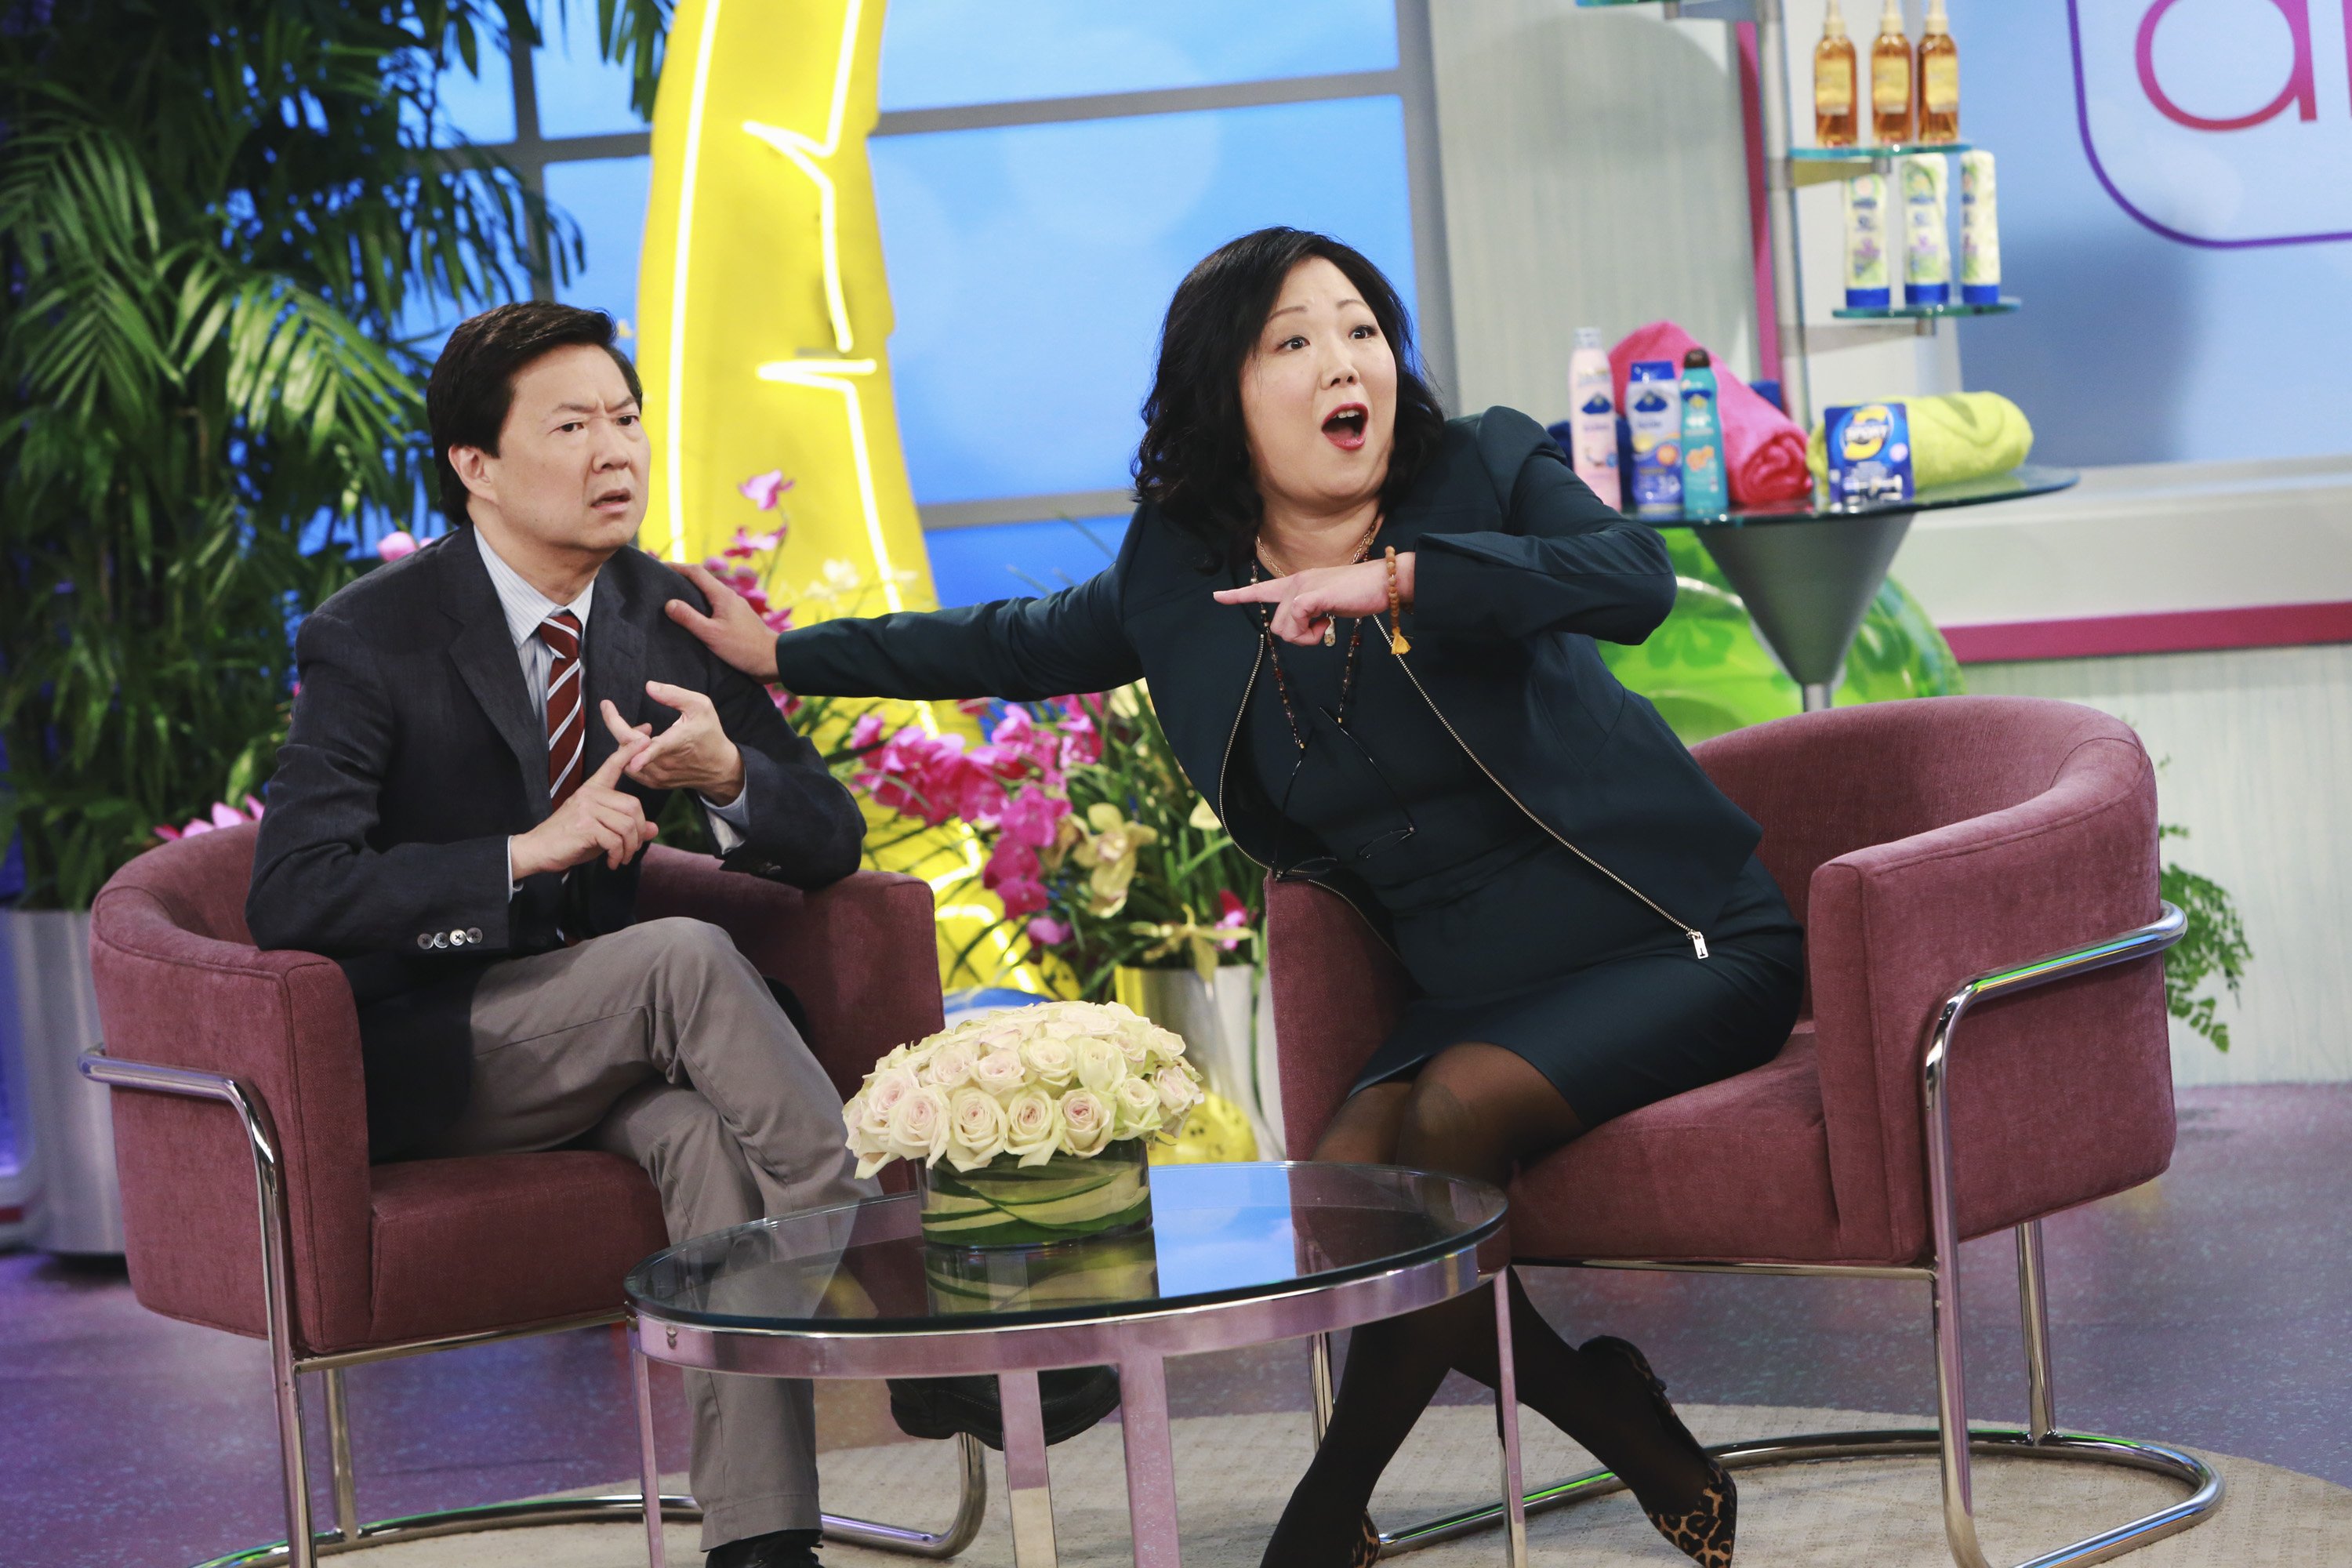 Ken Jeong and Margaret Cho on "Dr. Ken" | Photo: Ron Tom/Disney General Entertainment Content via Getty Images